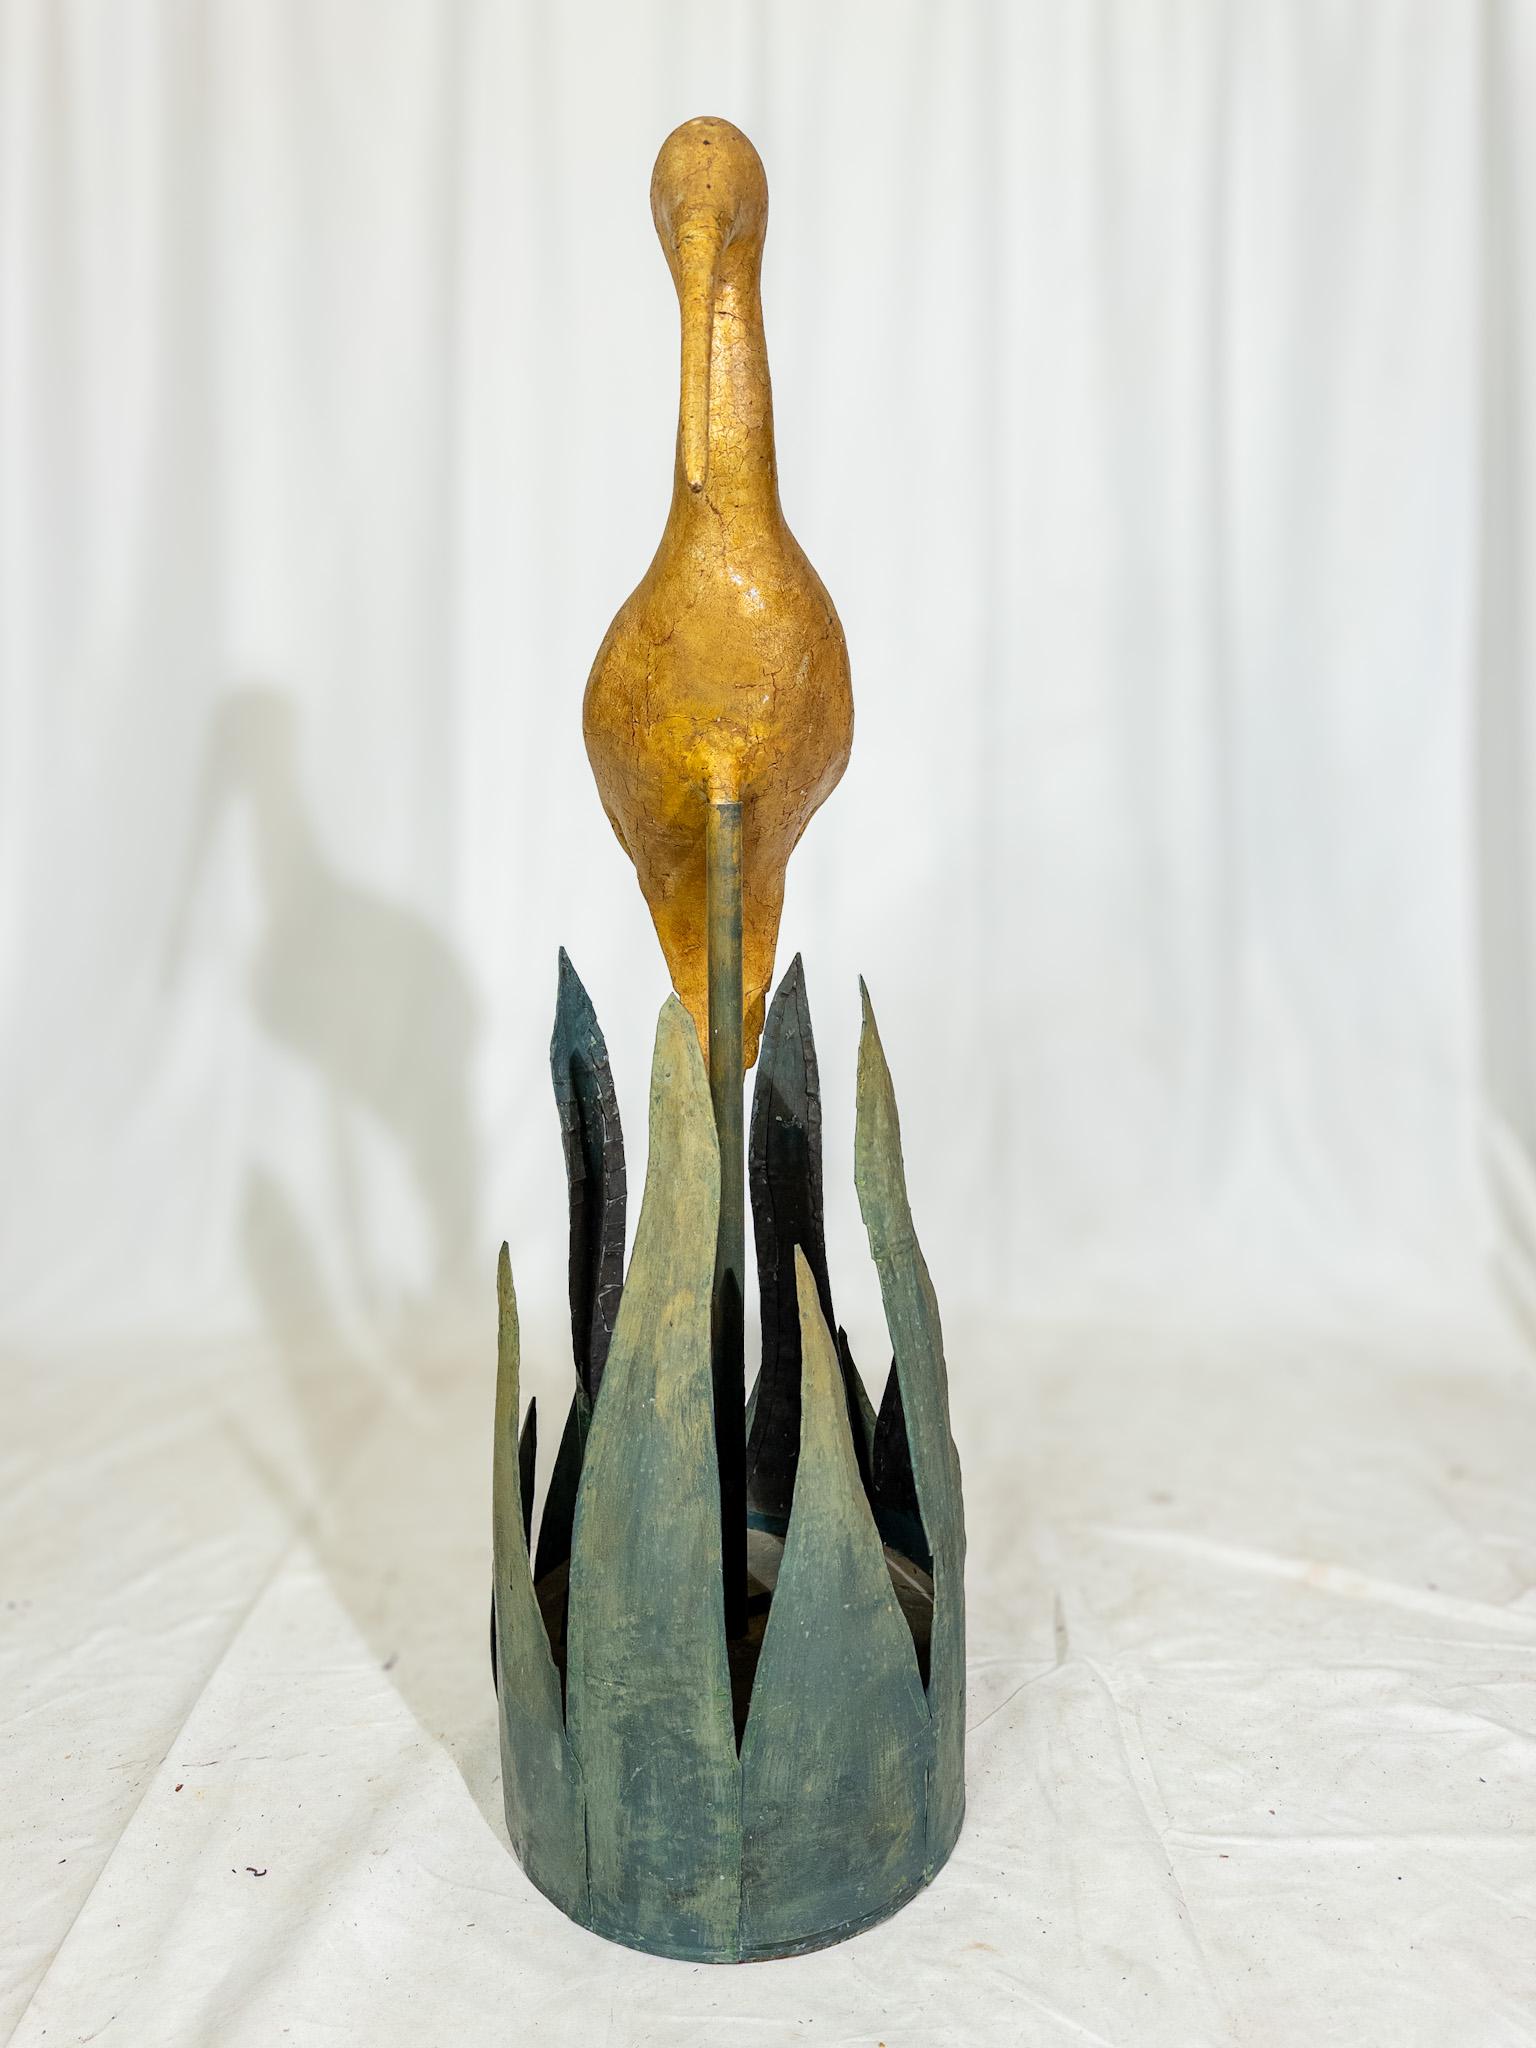 The Folk Art Sculpture of the shore bird is a radiant manifestation of creativity and imagination, blending elements of nature with artistic expression. Crafted as a composite heron, its golden hues shimmer with a timeless allure, capturing the